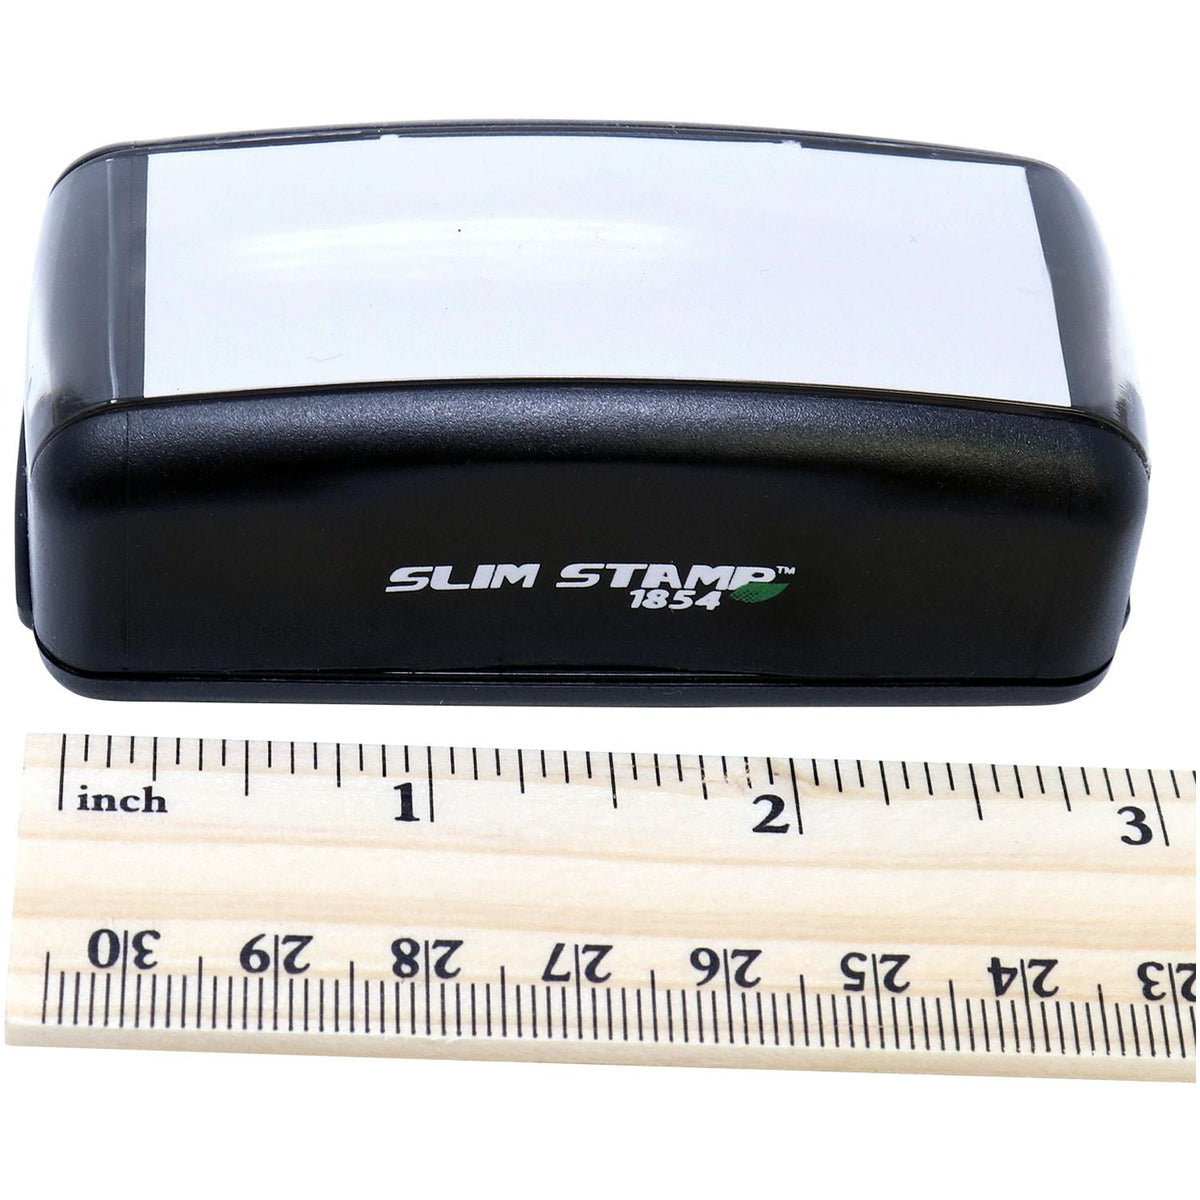 Measurement Large Pre-Inked Attorney-Client Privilege Stamp with Ruler